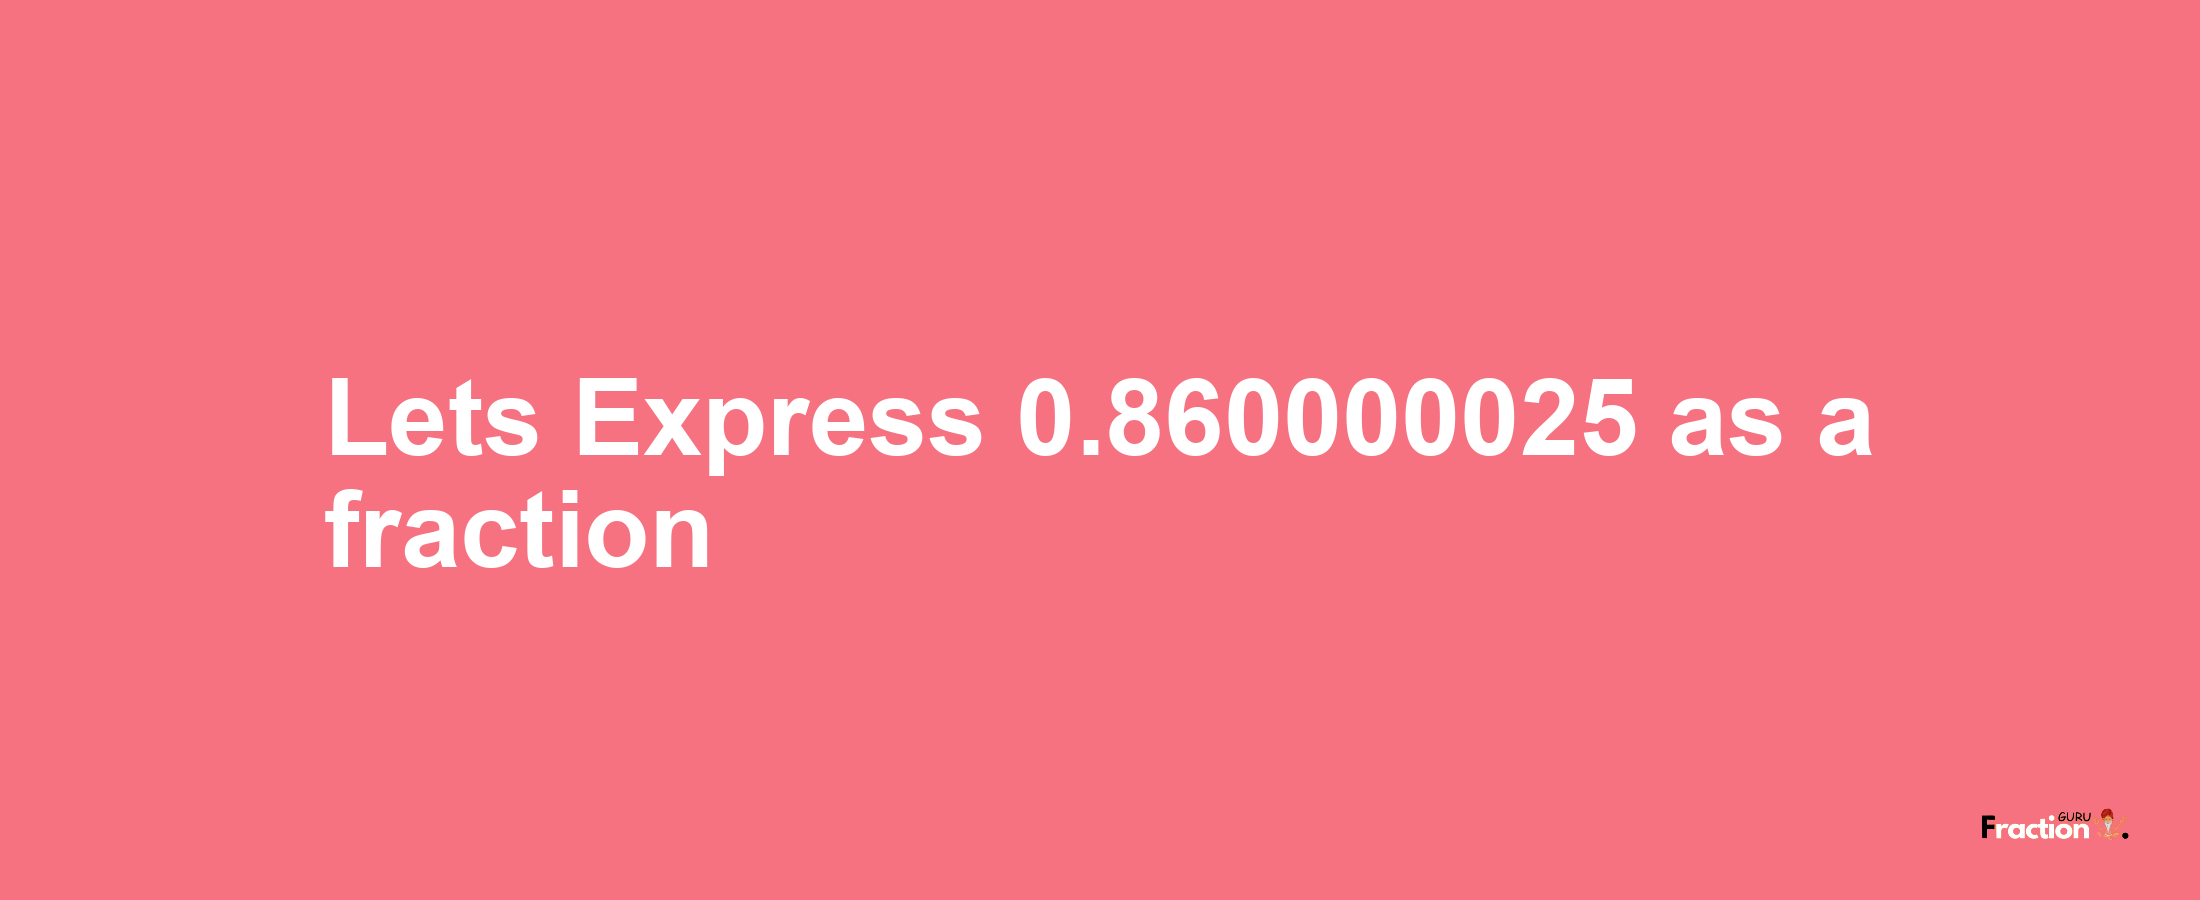 Lets Express 0.860000025 as afraction